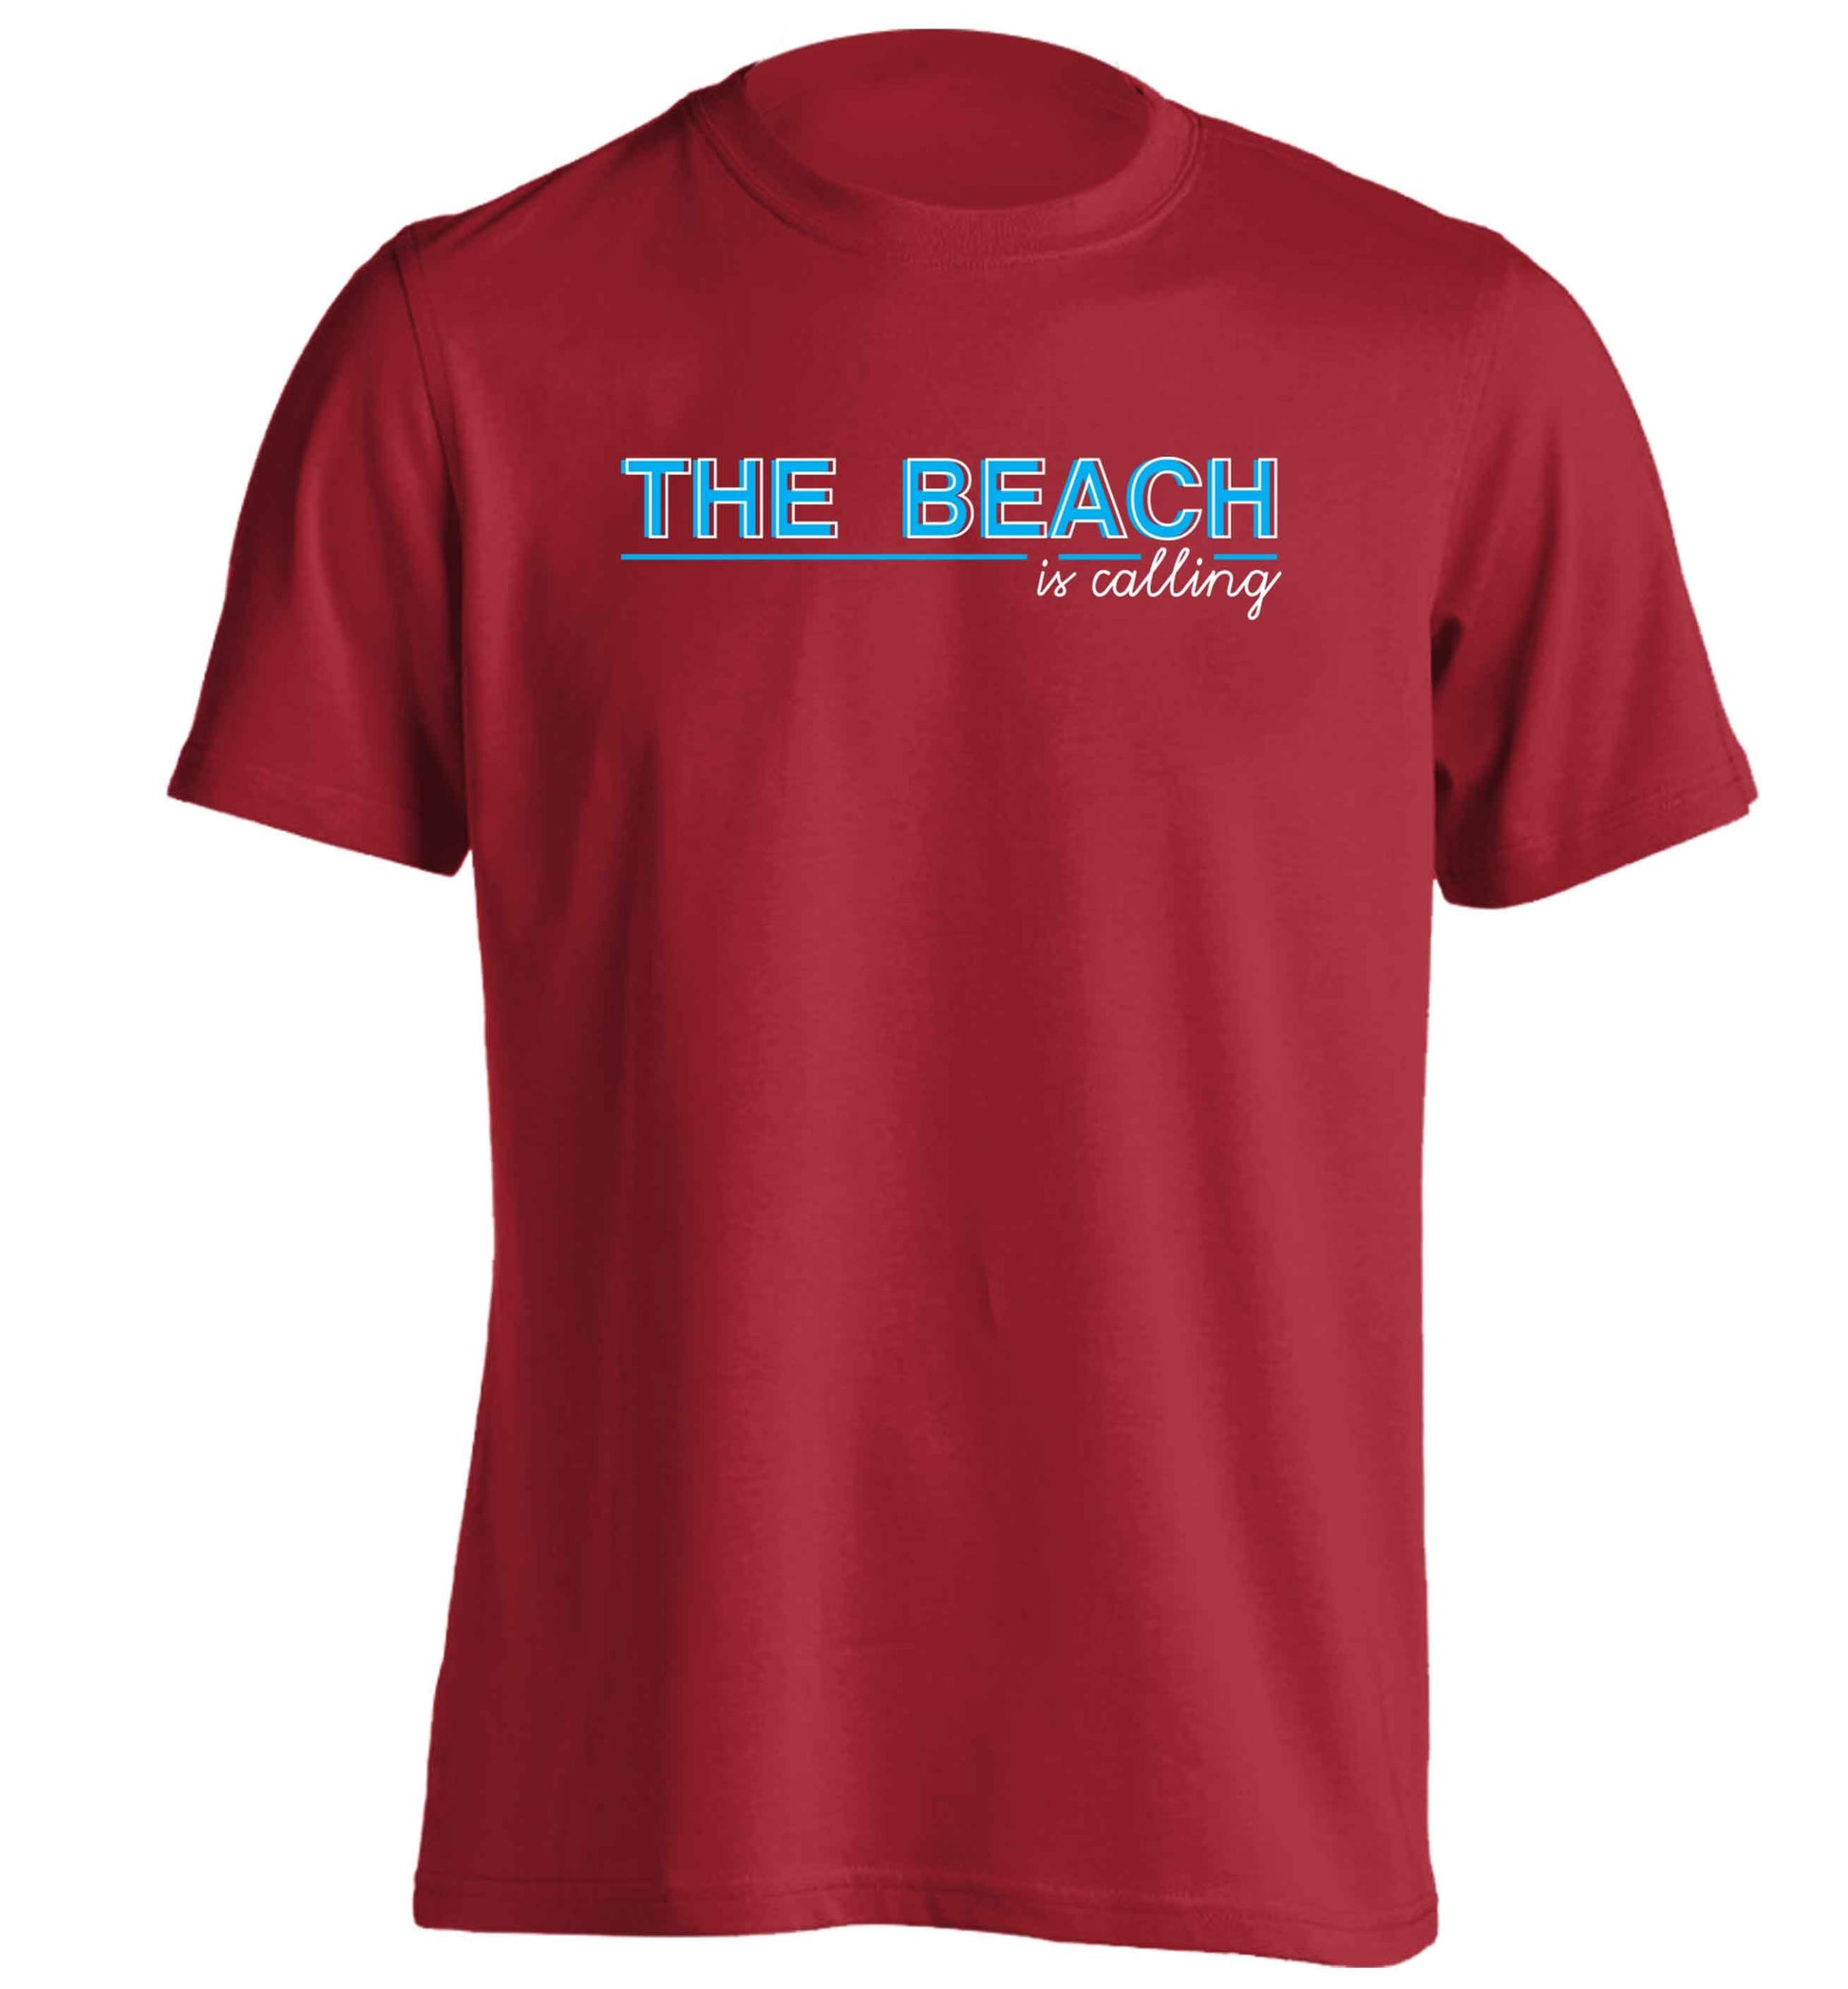 The beach is calling adults unisex red Tshirt 2XL